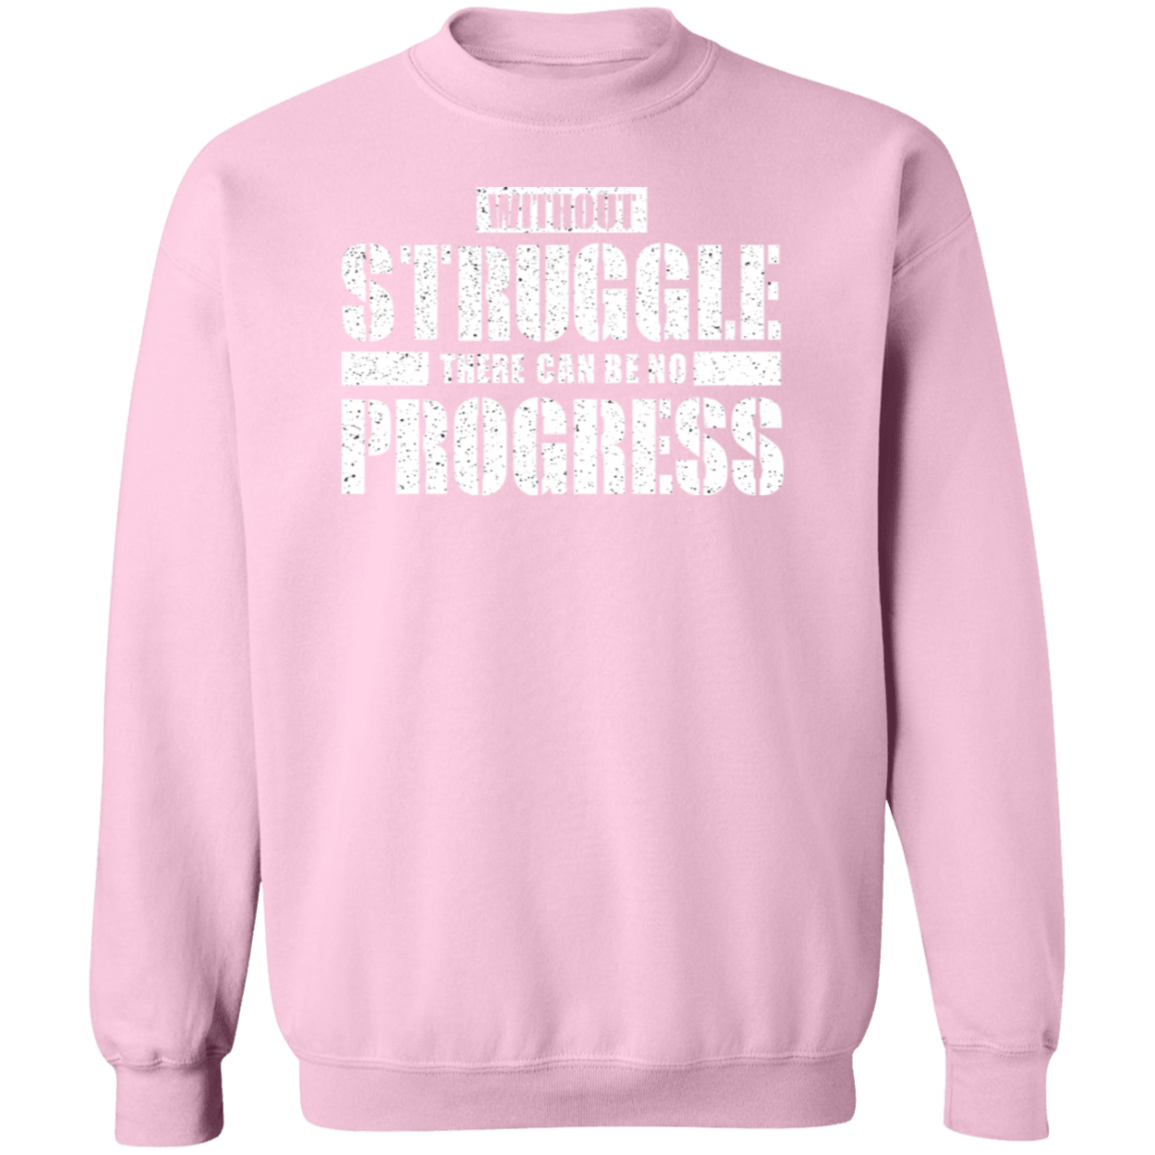 Without Struggle There can be no progress Premium Crew Neck Sweatshirt